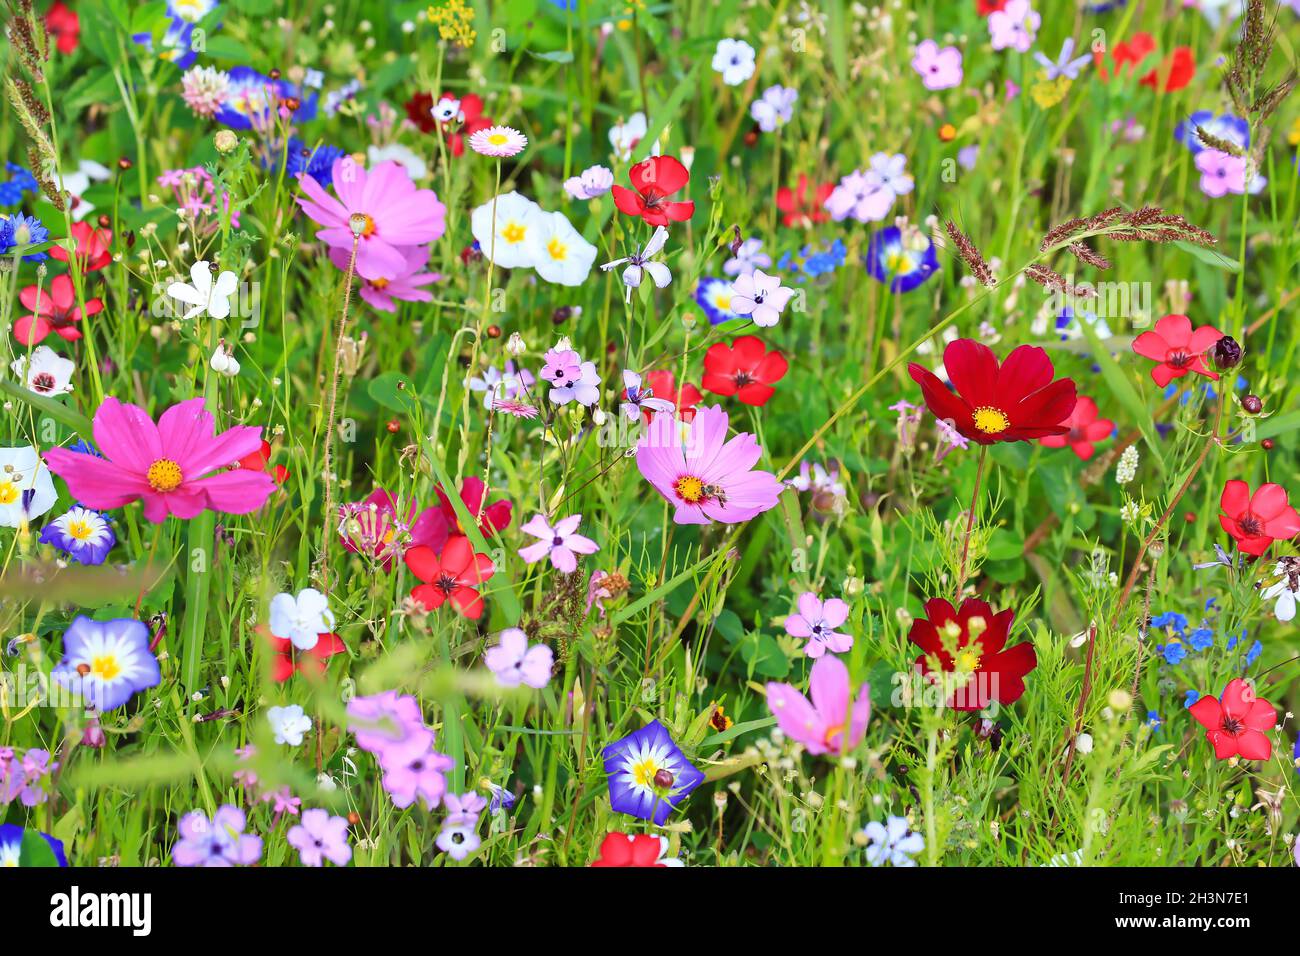 Colorful flower meadow in the primary color green with different wild flowers. Stock Photo